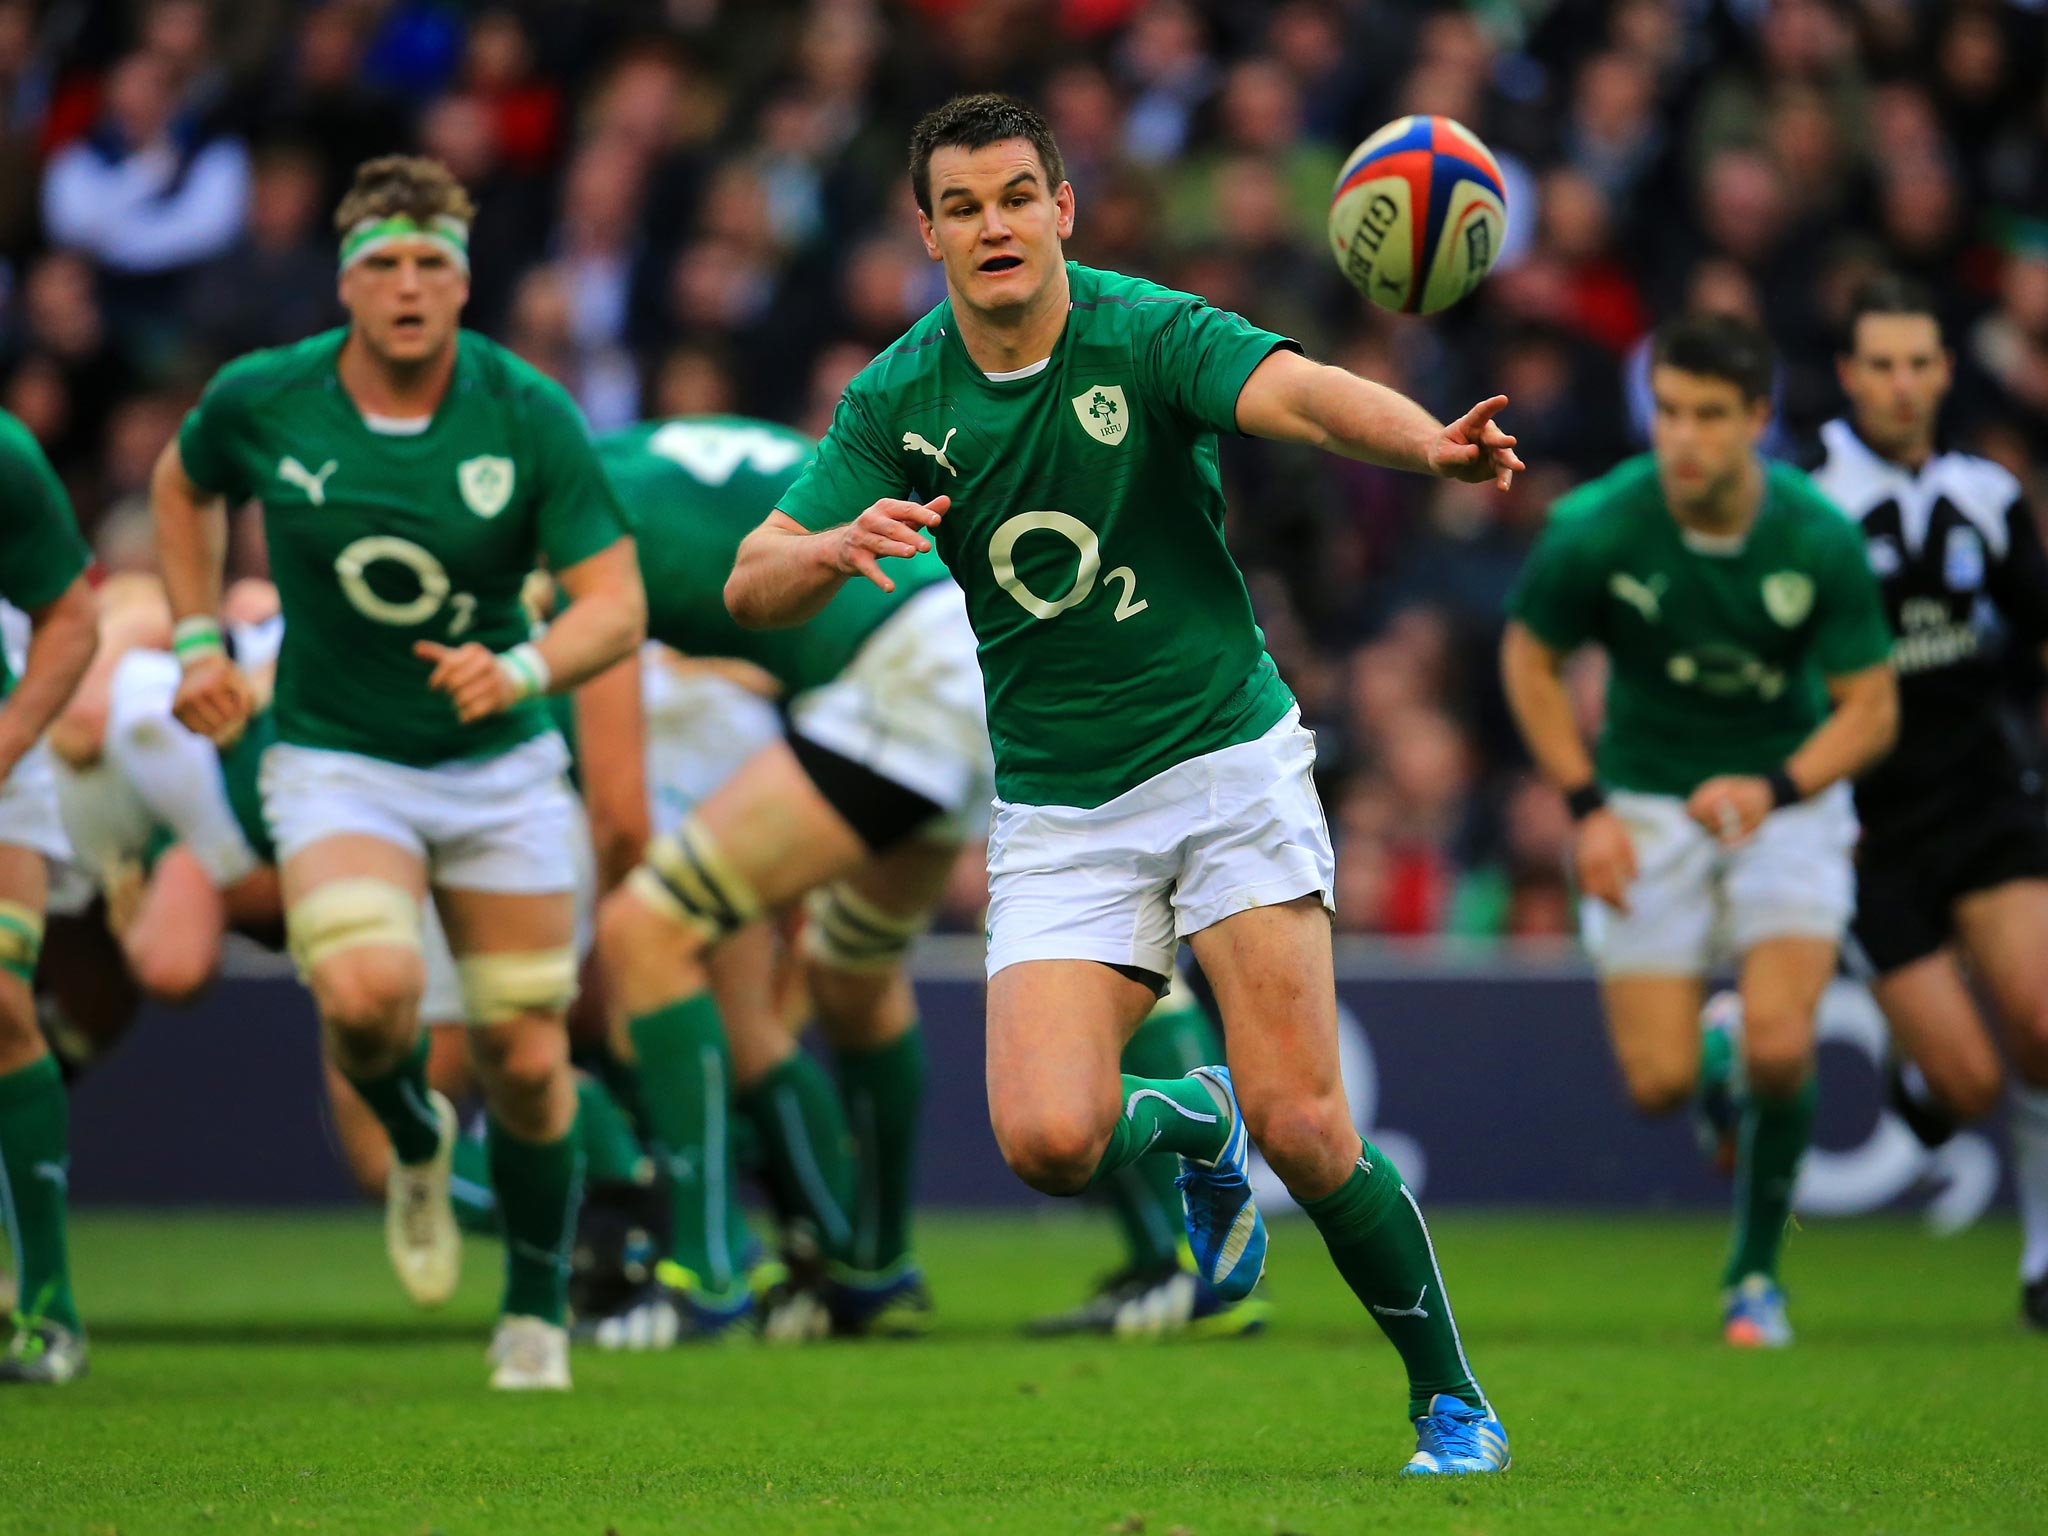 Jonathan Sexton has been passed fit for Ireland's match against Italy